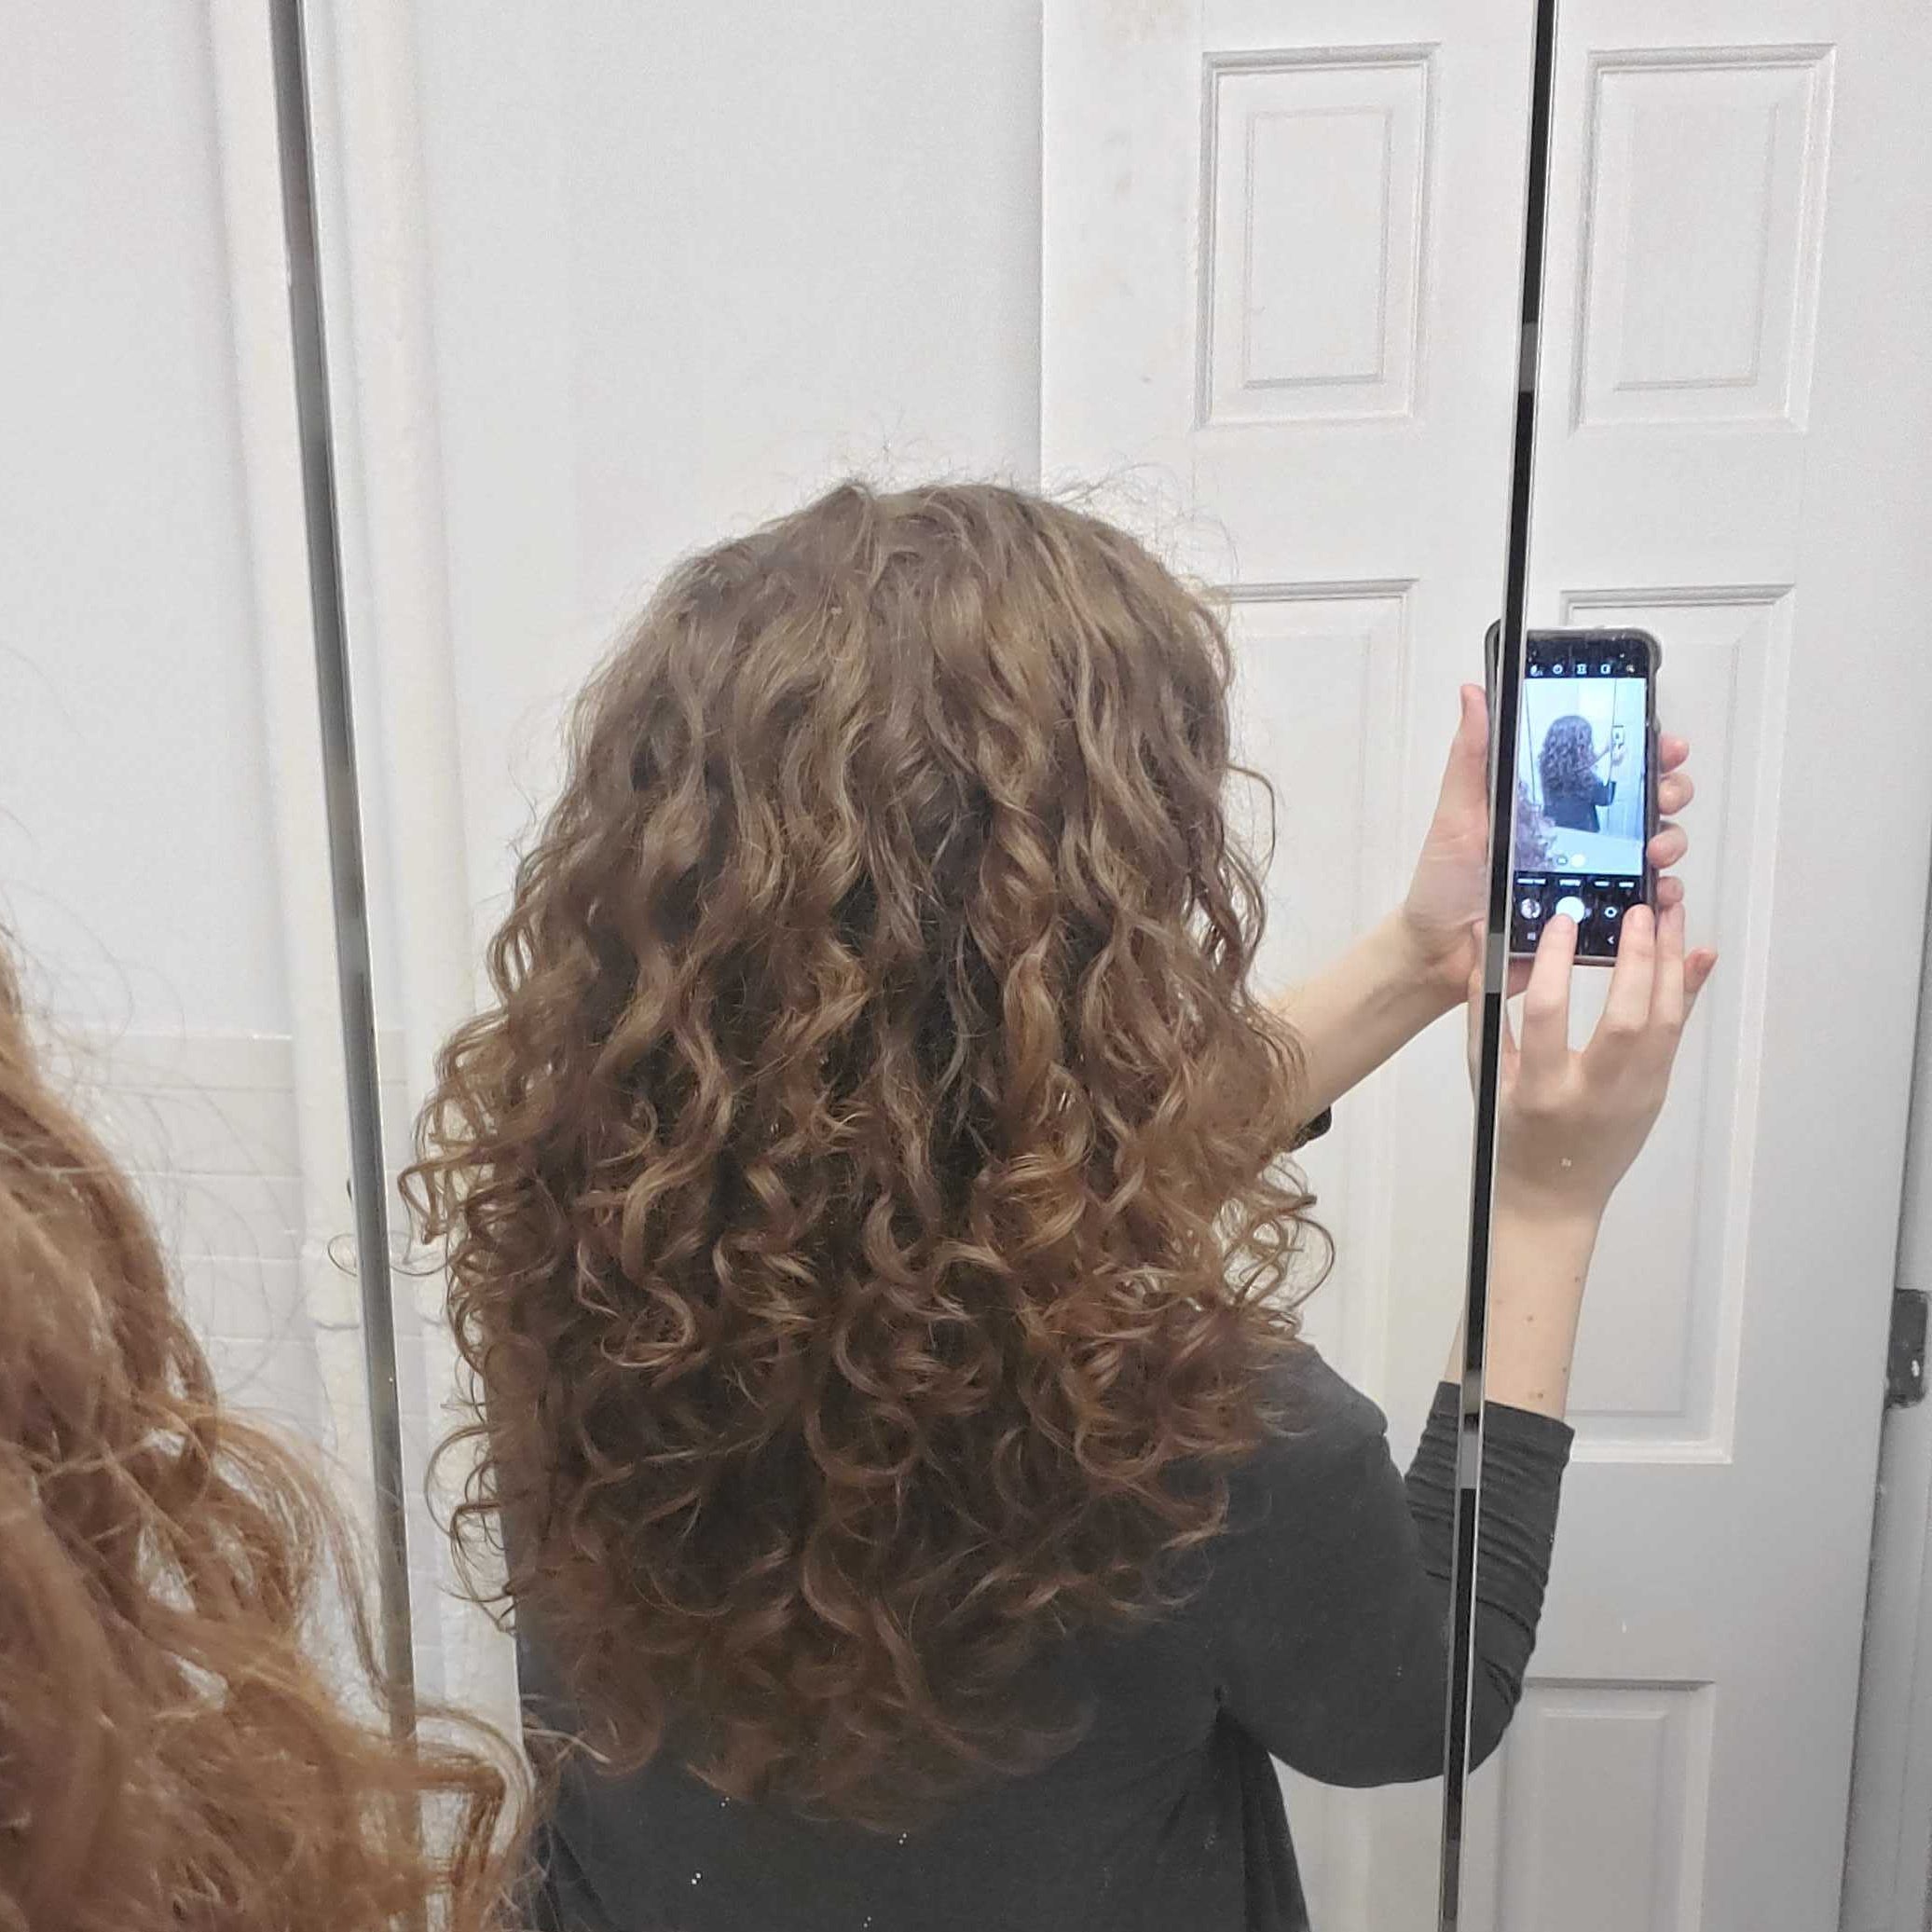 Mirror picture of wavy hair that has been diffused with a pasta strainer, from the back.